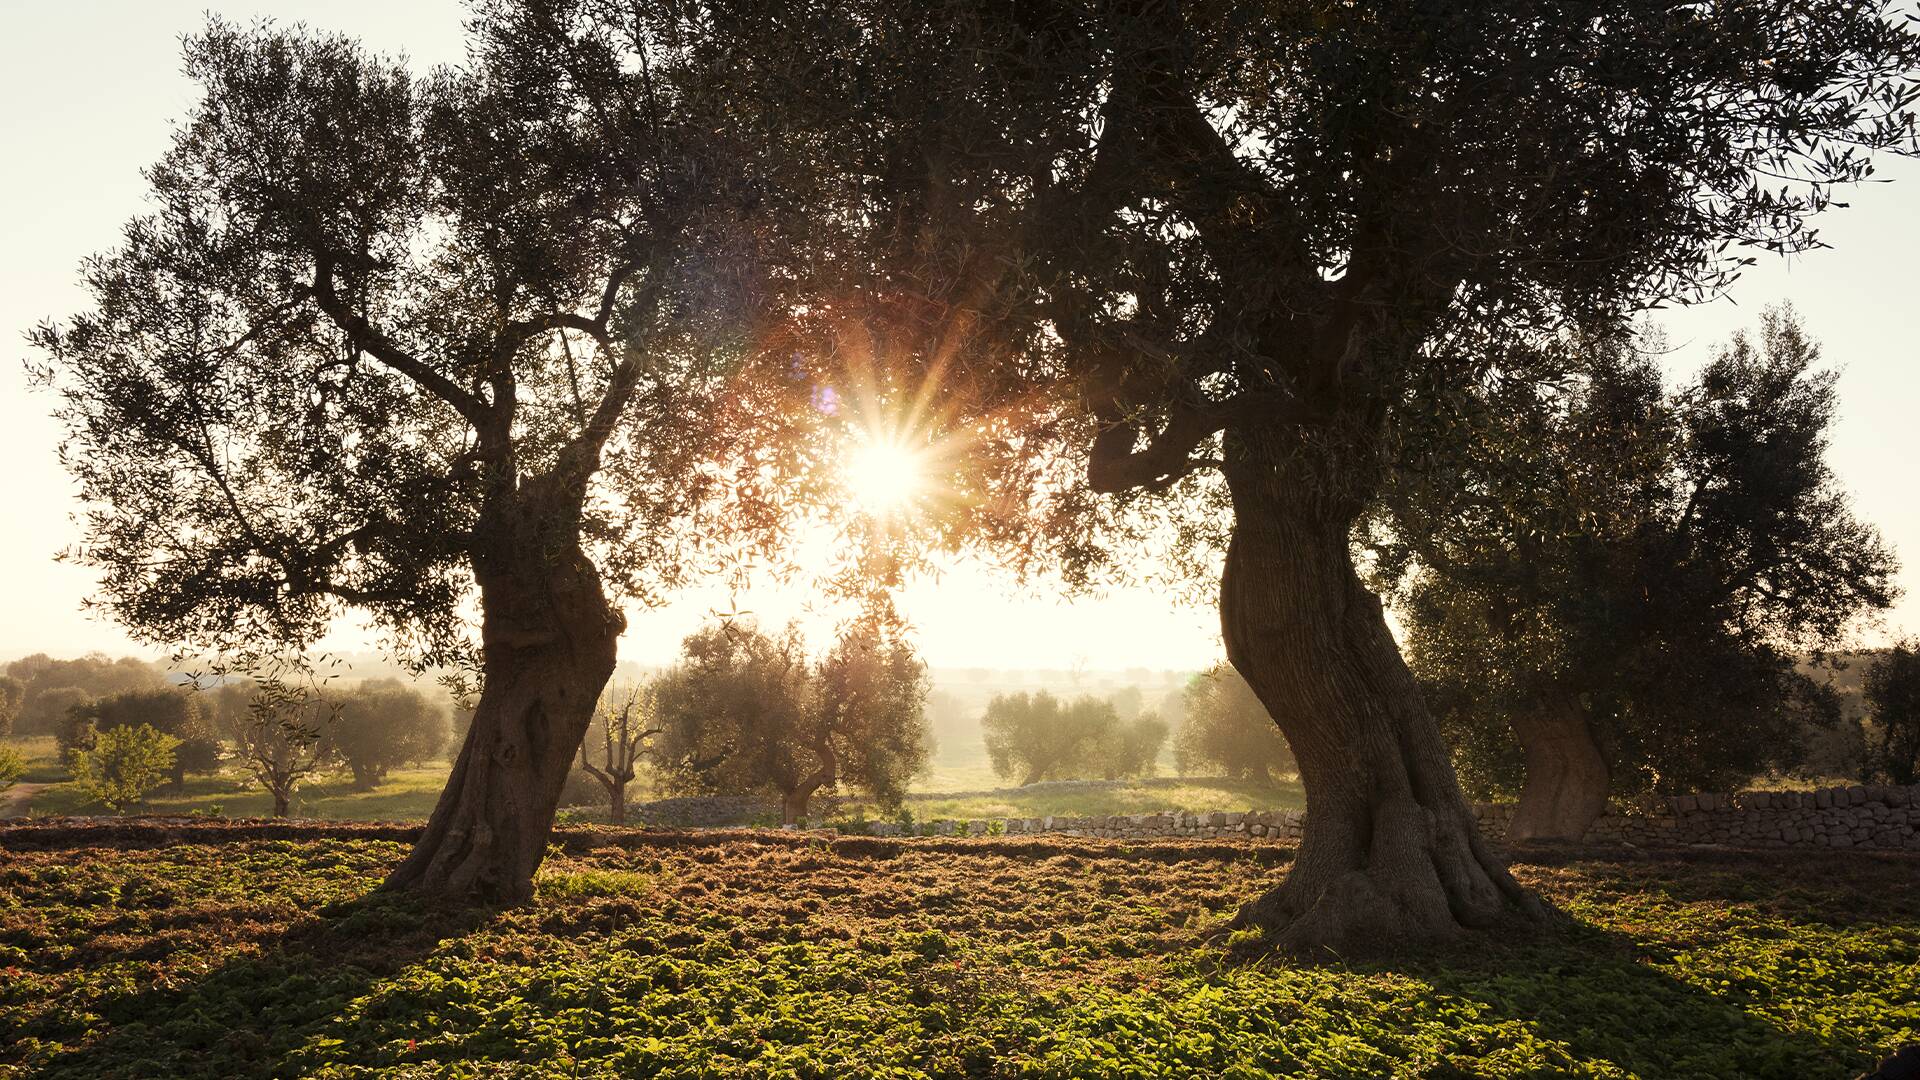 Apulian countryside with olive trees